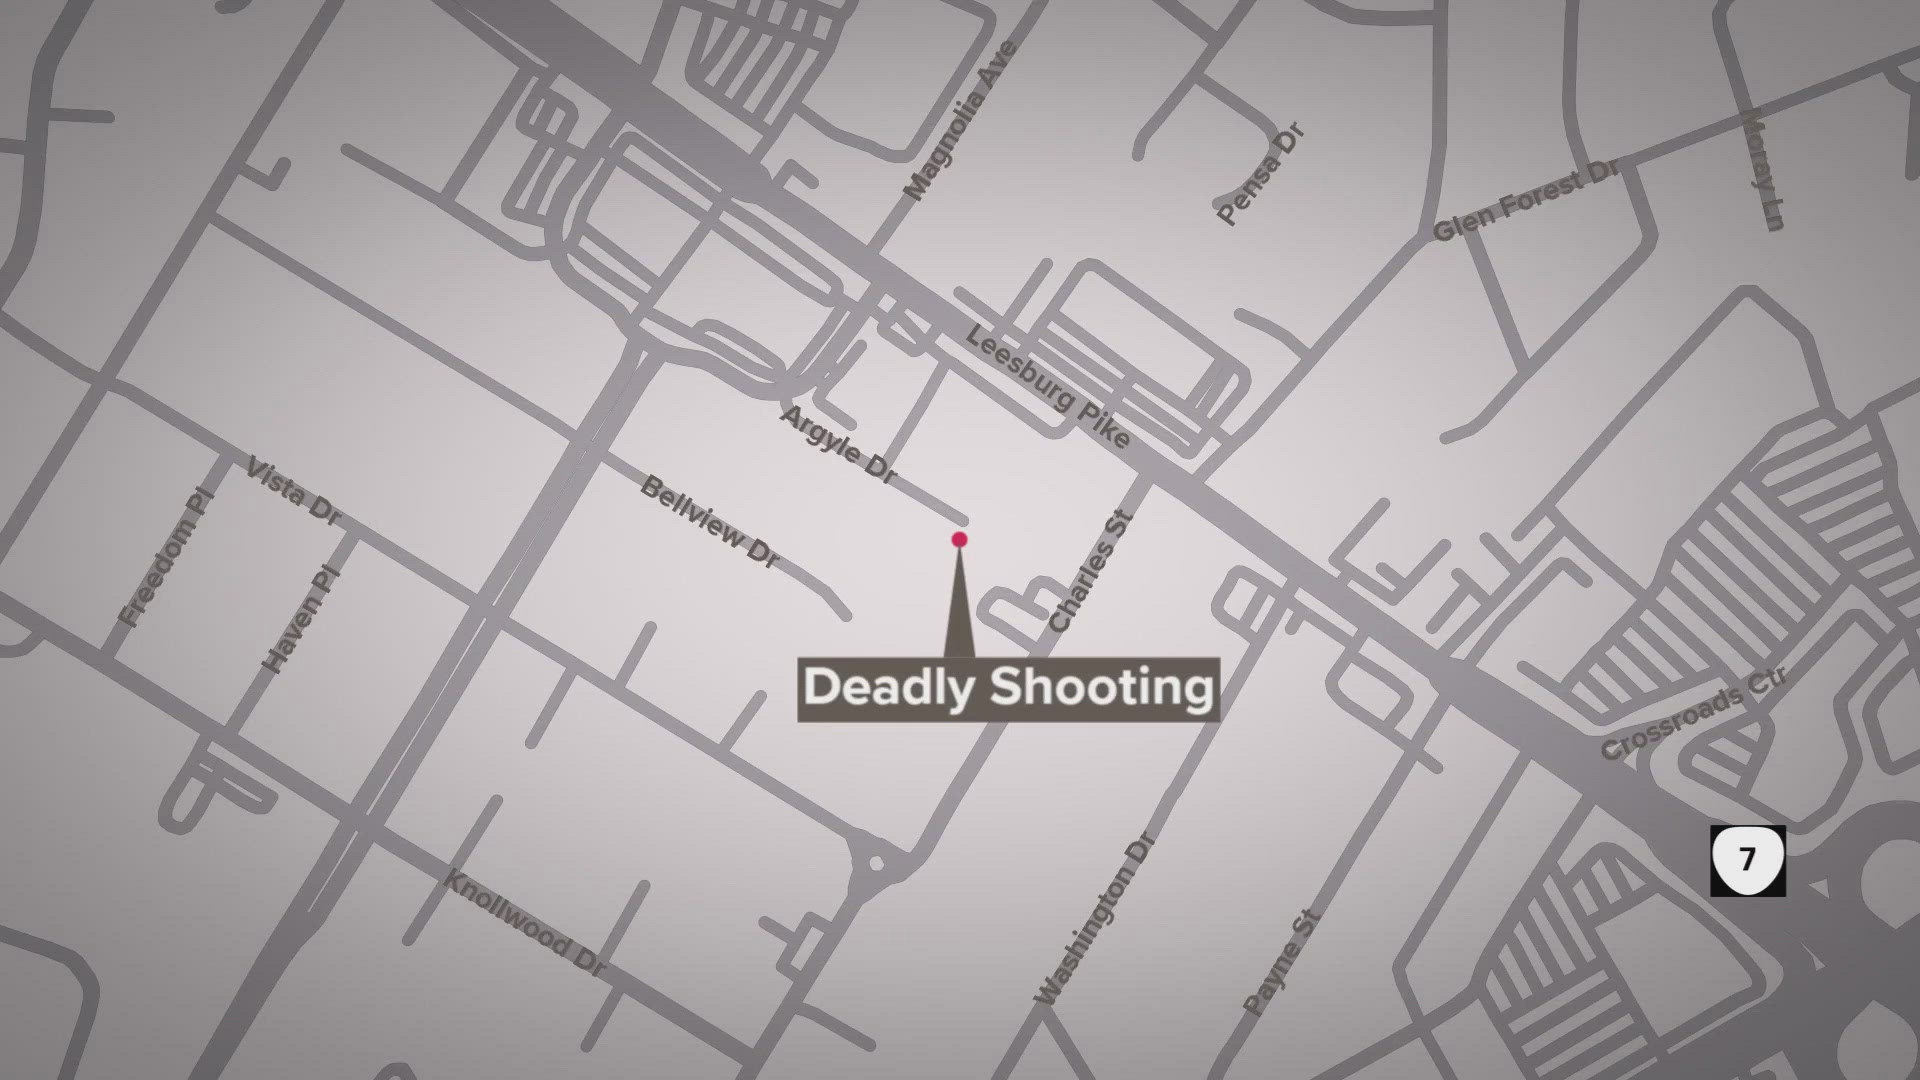 A shooting in Bailey's Crossroads has left a man dead early Friday, and has sparked a homicide investigation into what happened.